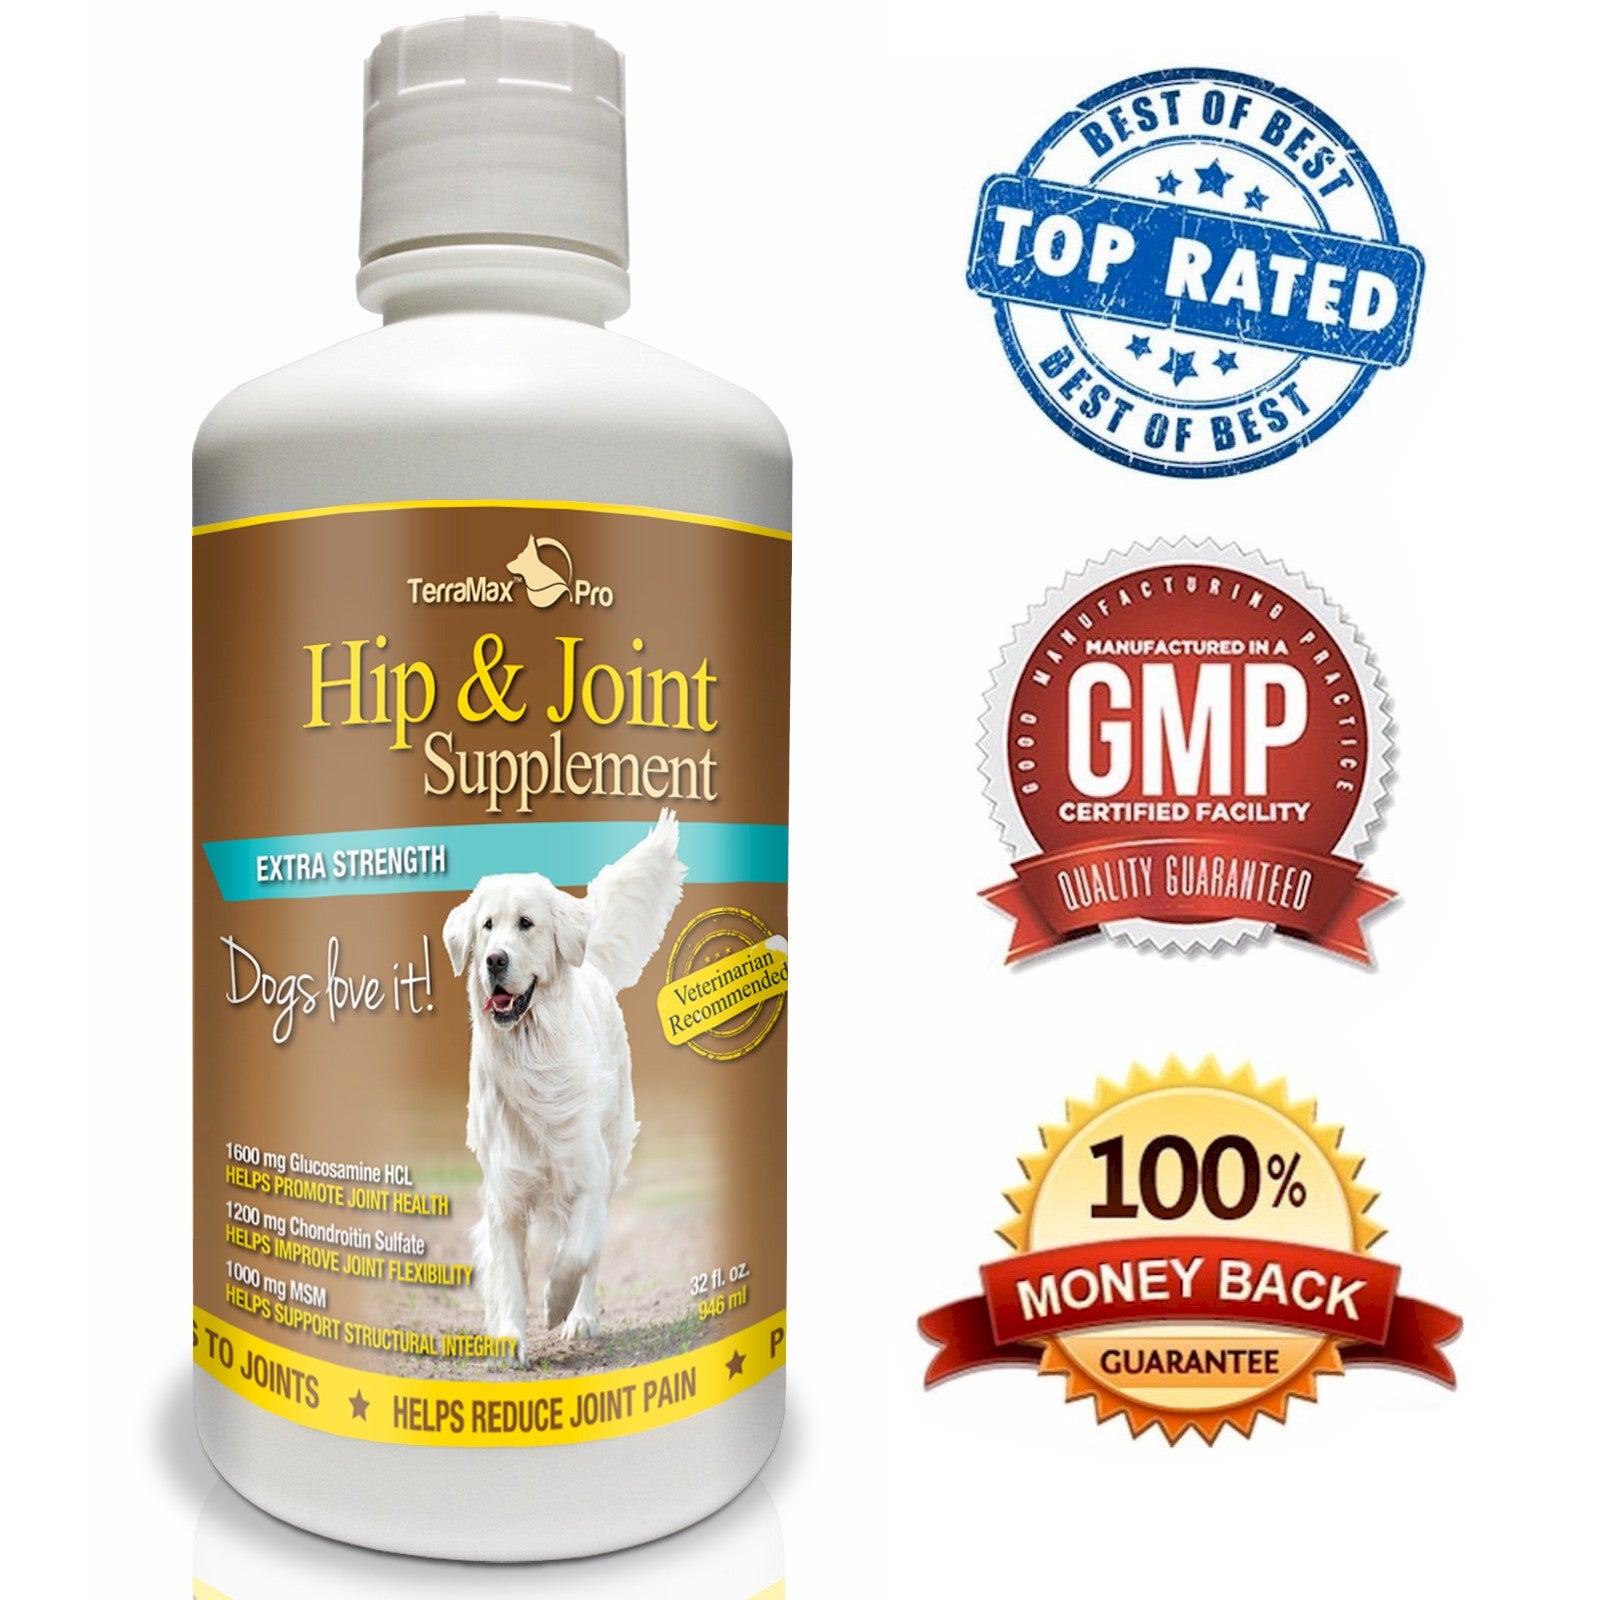 whats the best hip and joint supplement for dogs